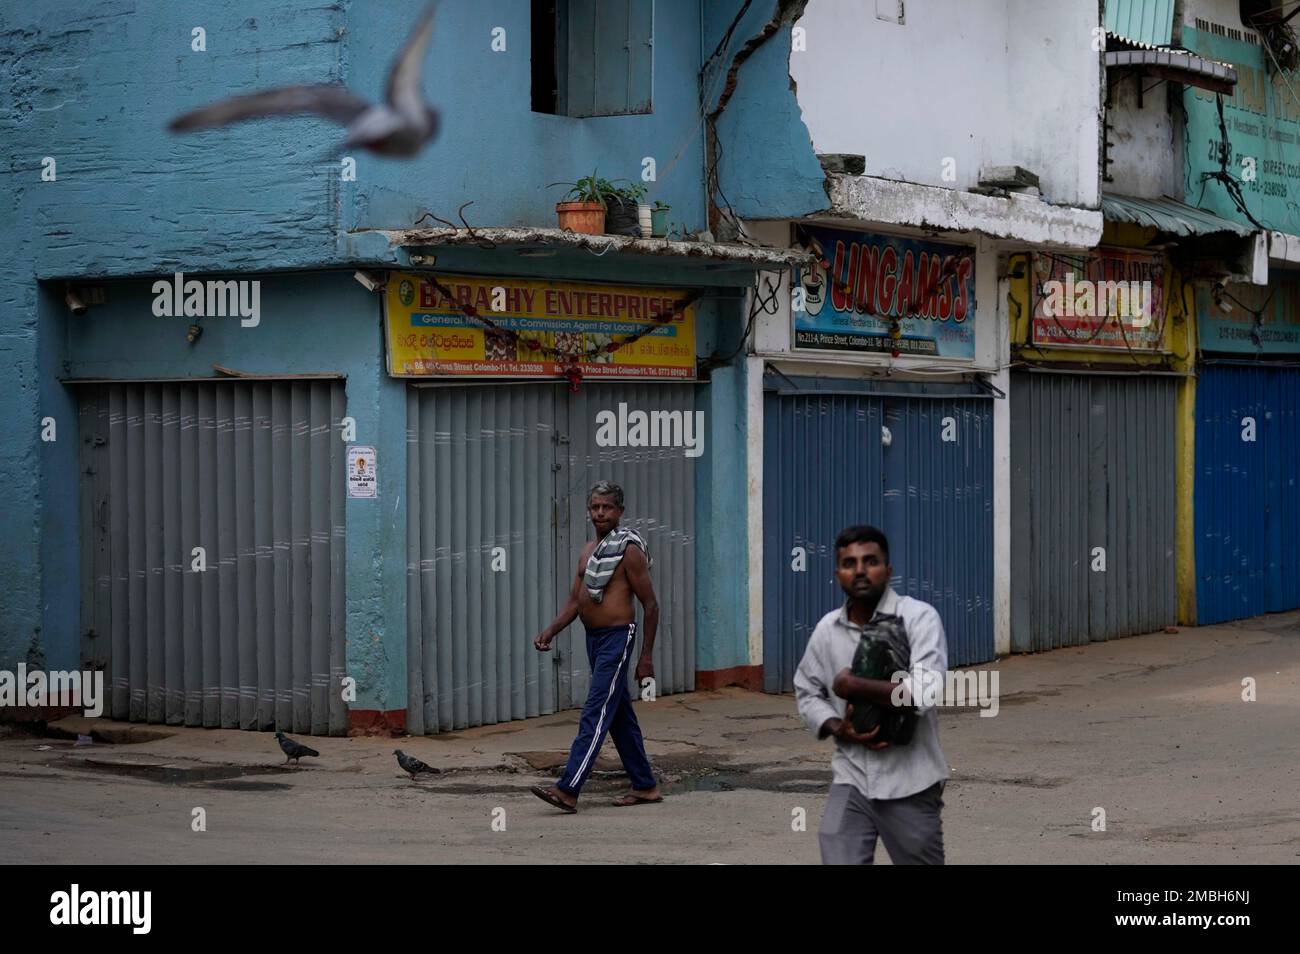 Sri Lankans walk on a deserted street at a wholesale market during